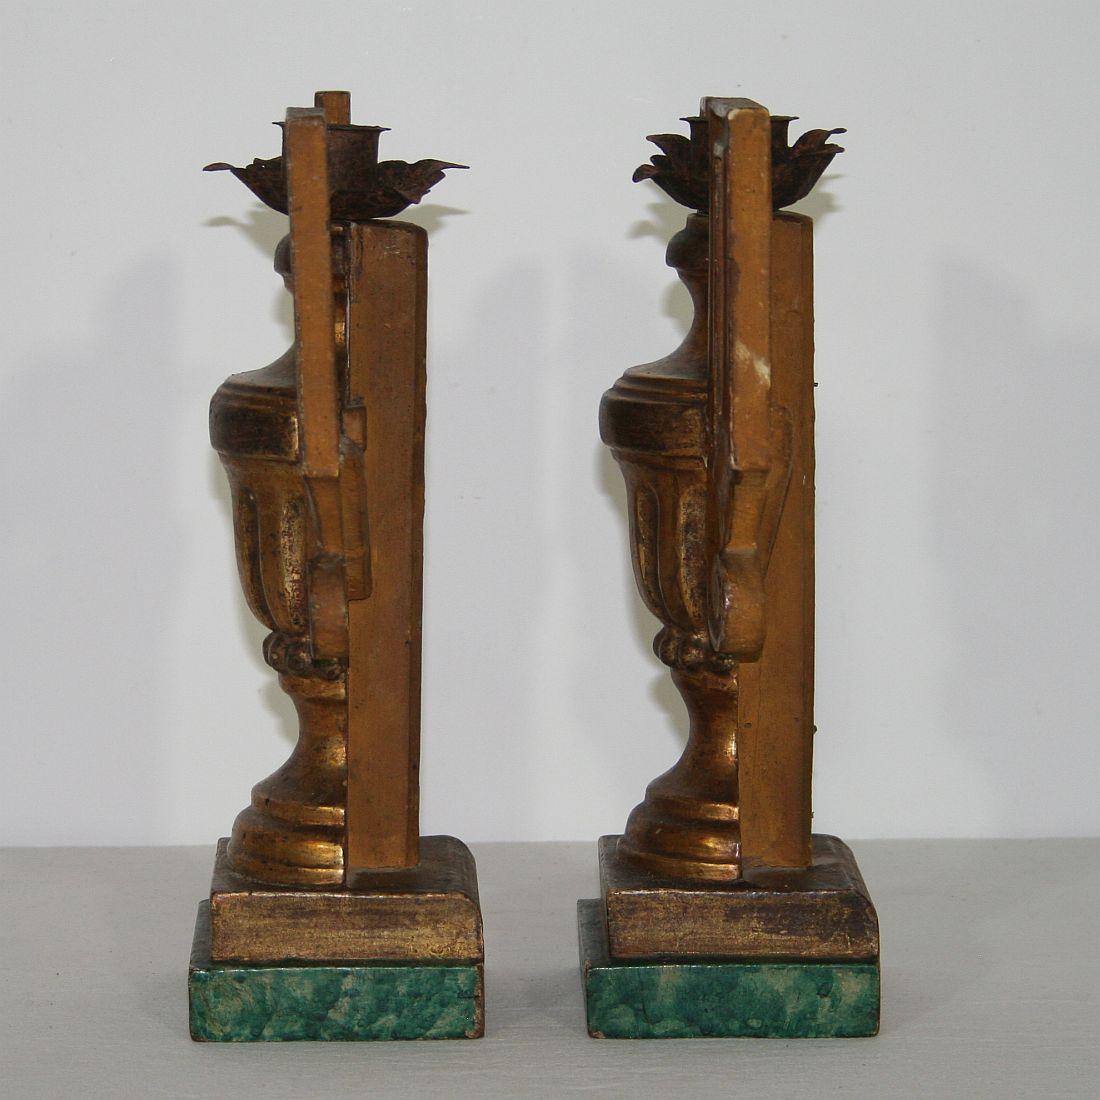 Gilt Pair of Late 18th Century Italian Neoclassical Carved Candleholders